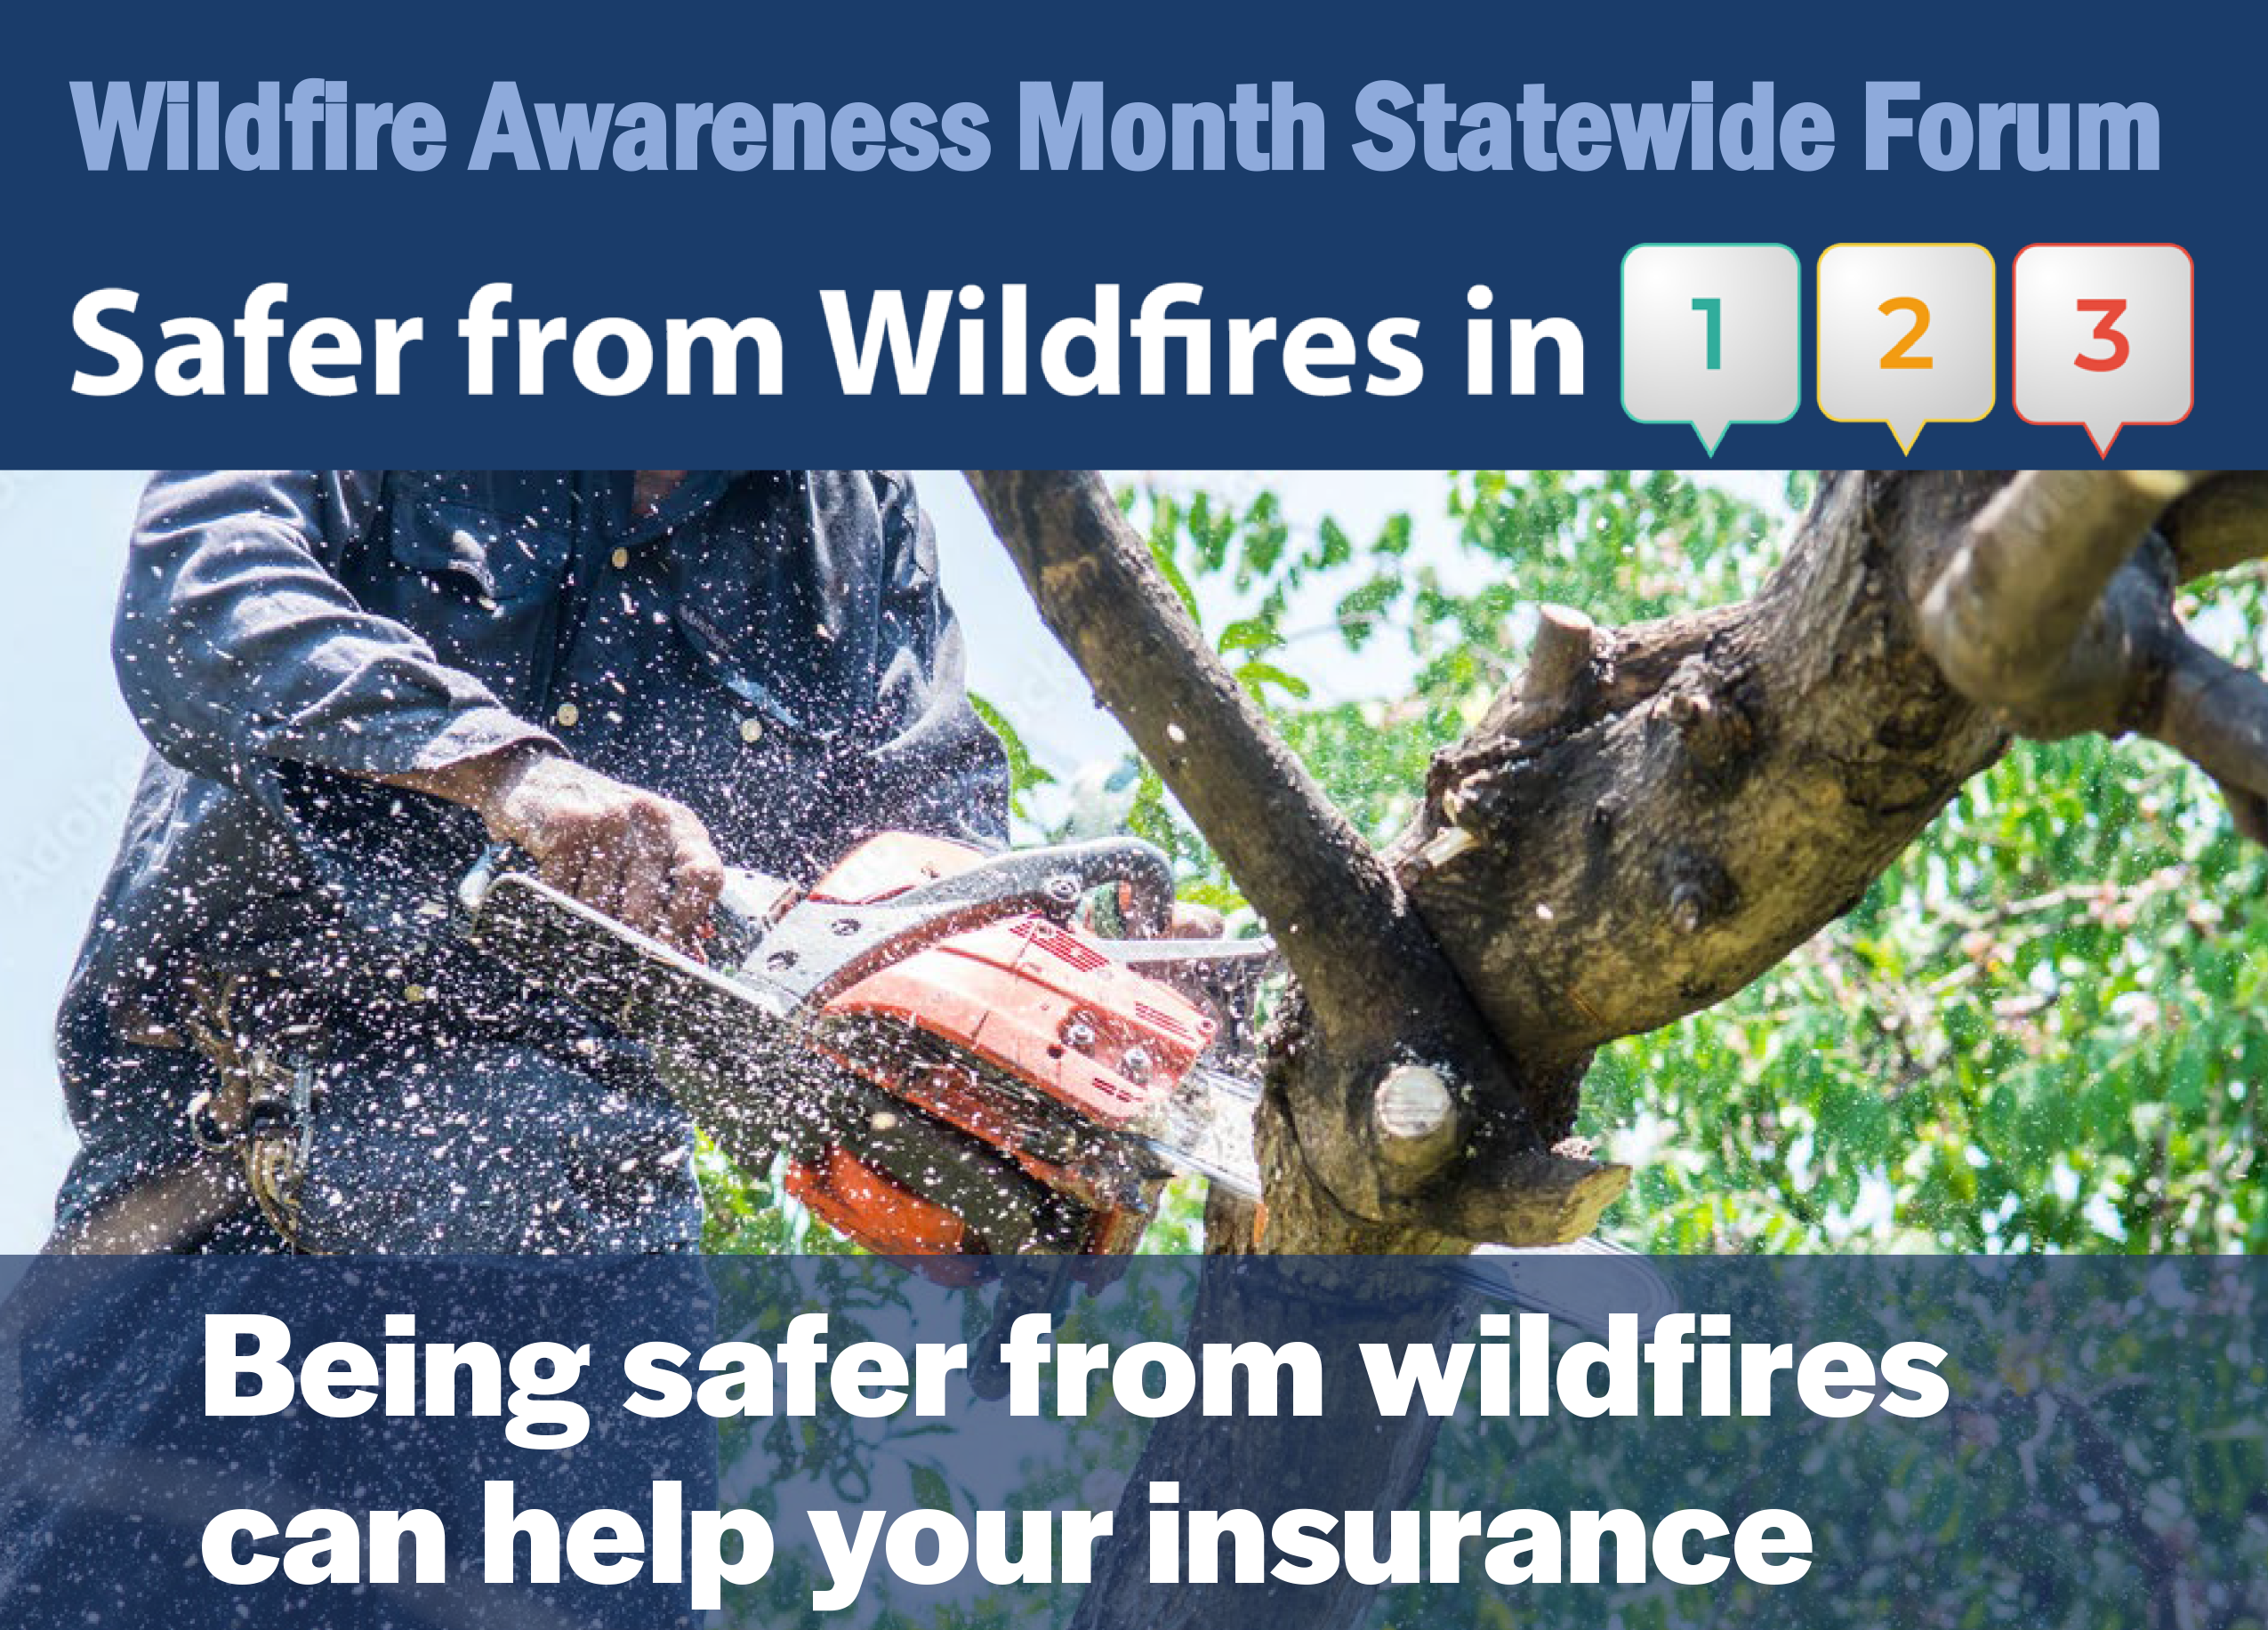 Wildfire Awareness Month Statewide Forum Safer from Wildfires in 1, 2, 3. Being safer from wildfires can help your insurance